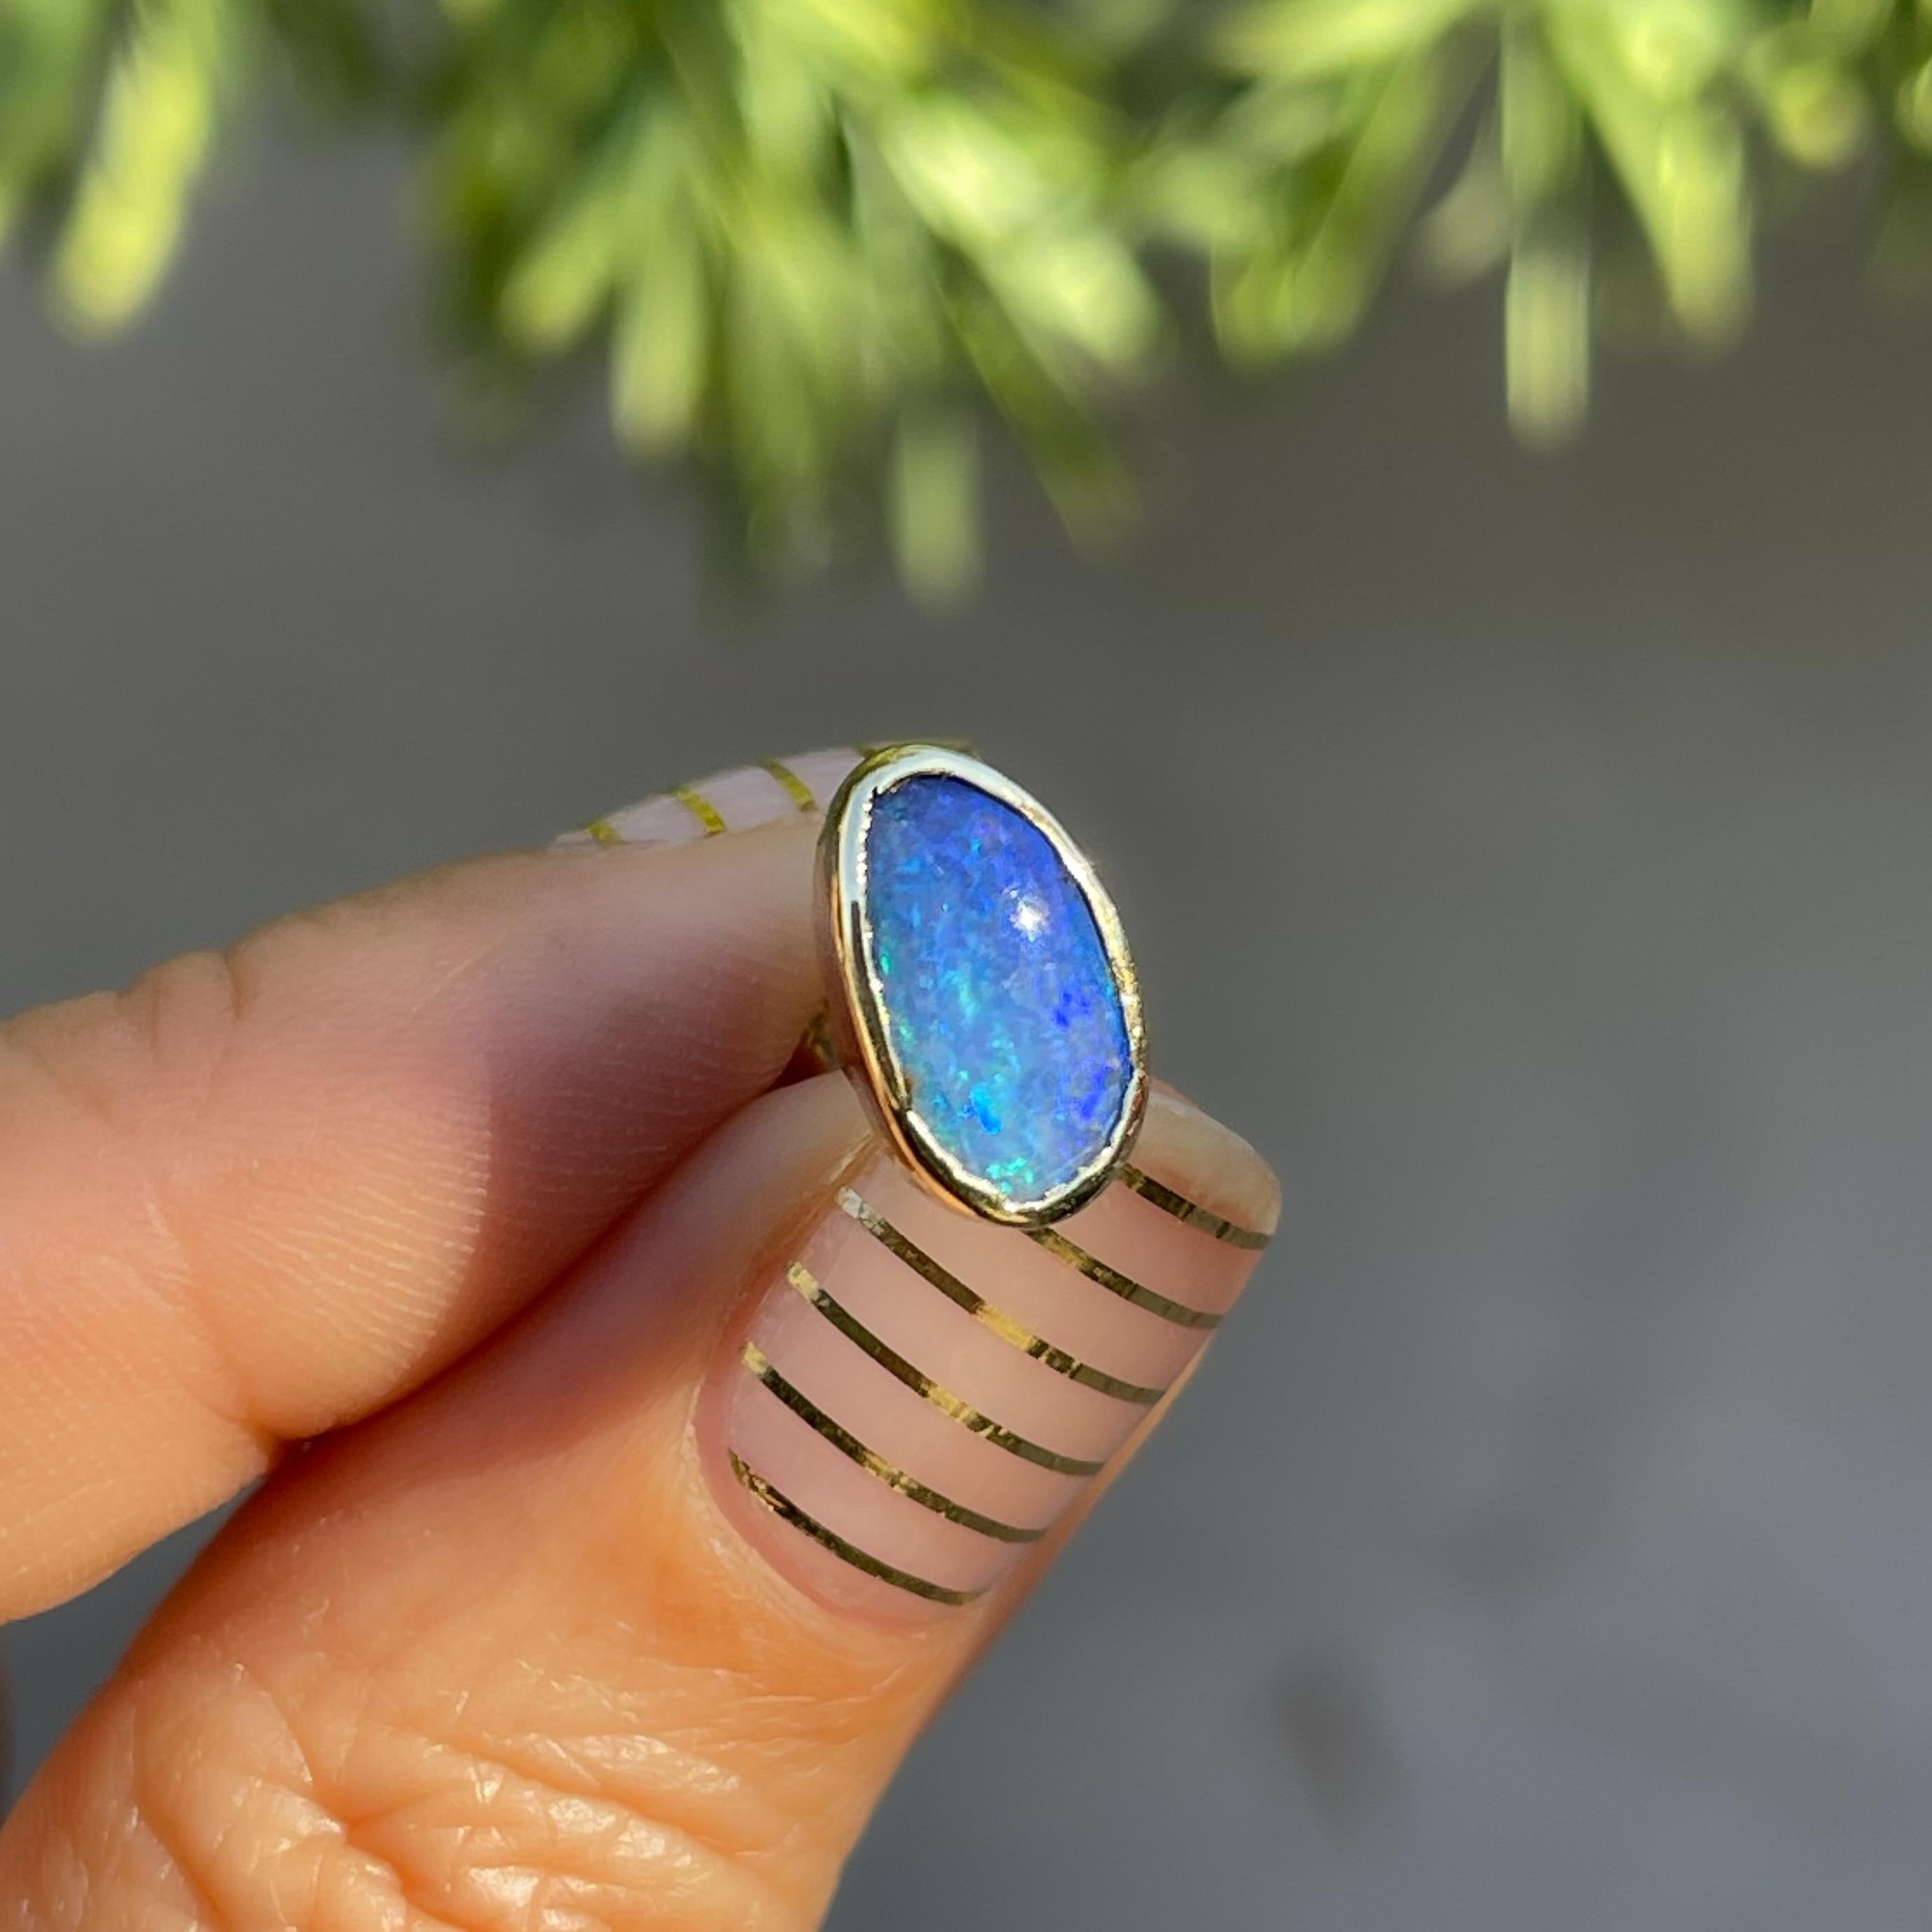 Bali Emerald and Opal Stud Earrings with Sapphire in Gold by NIXIN Jewelry In New Condition For Sale In Los Angeles, CA